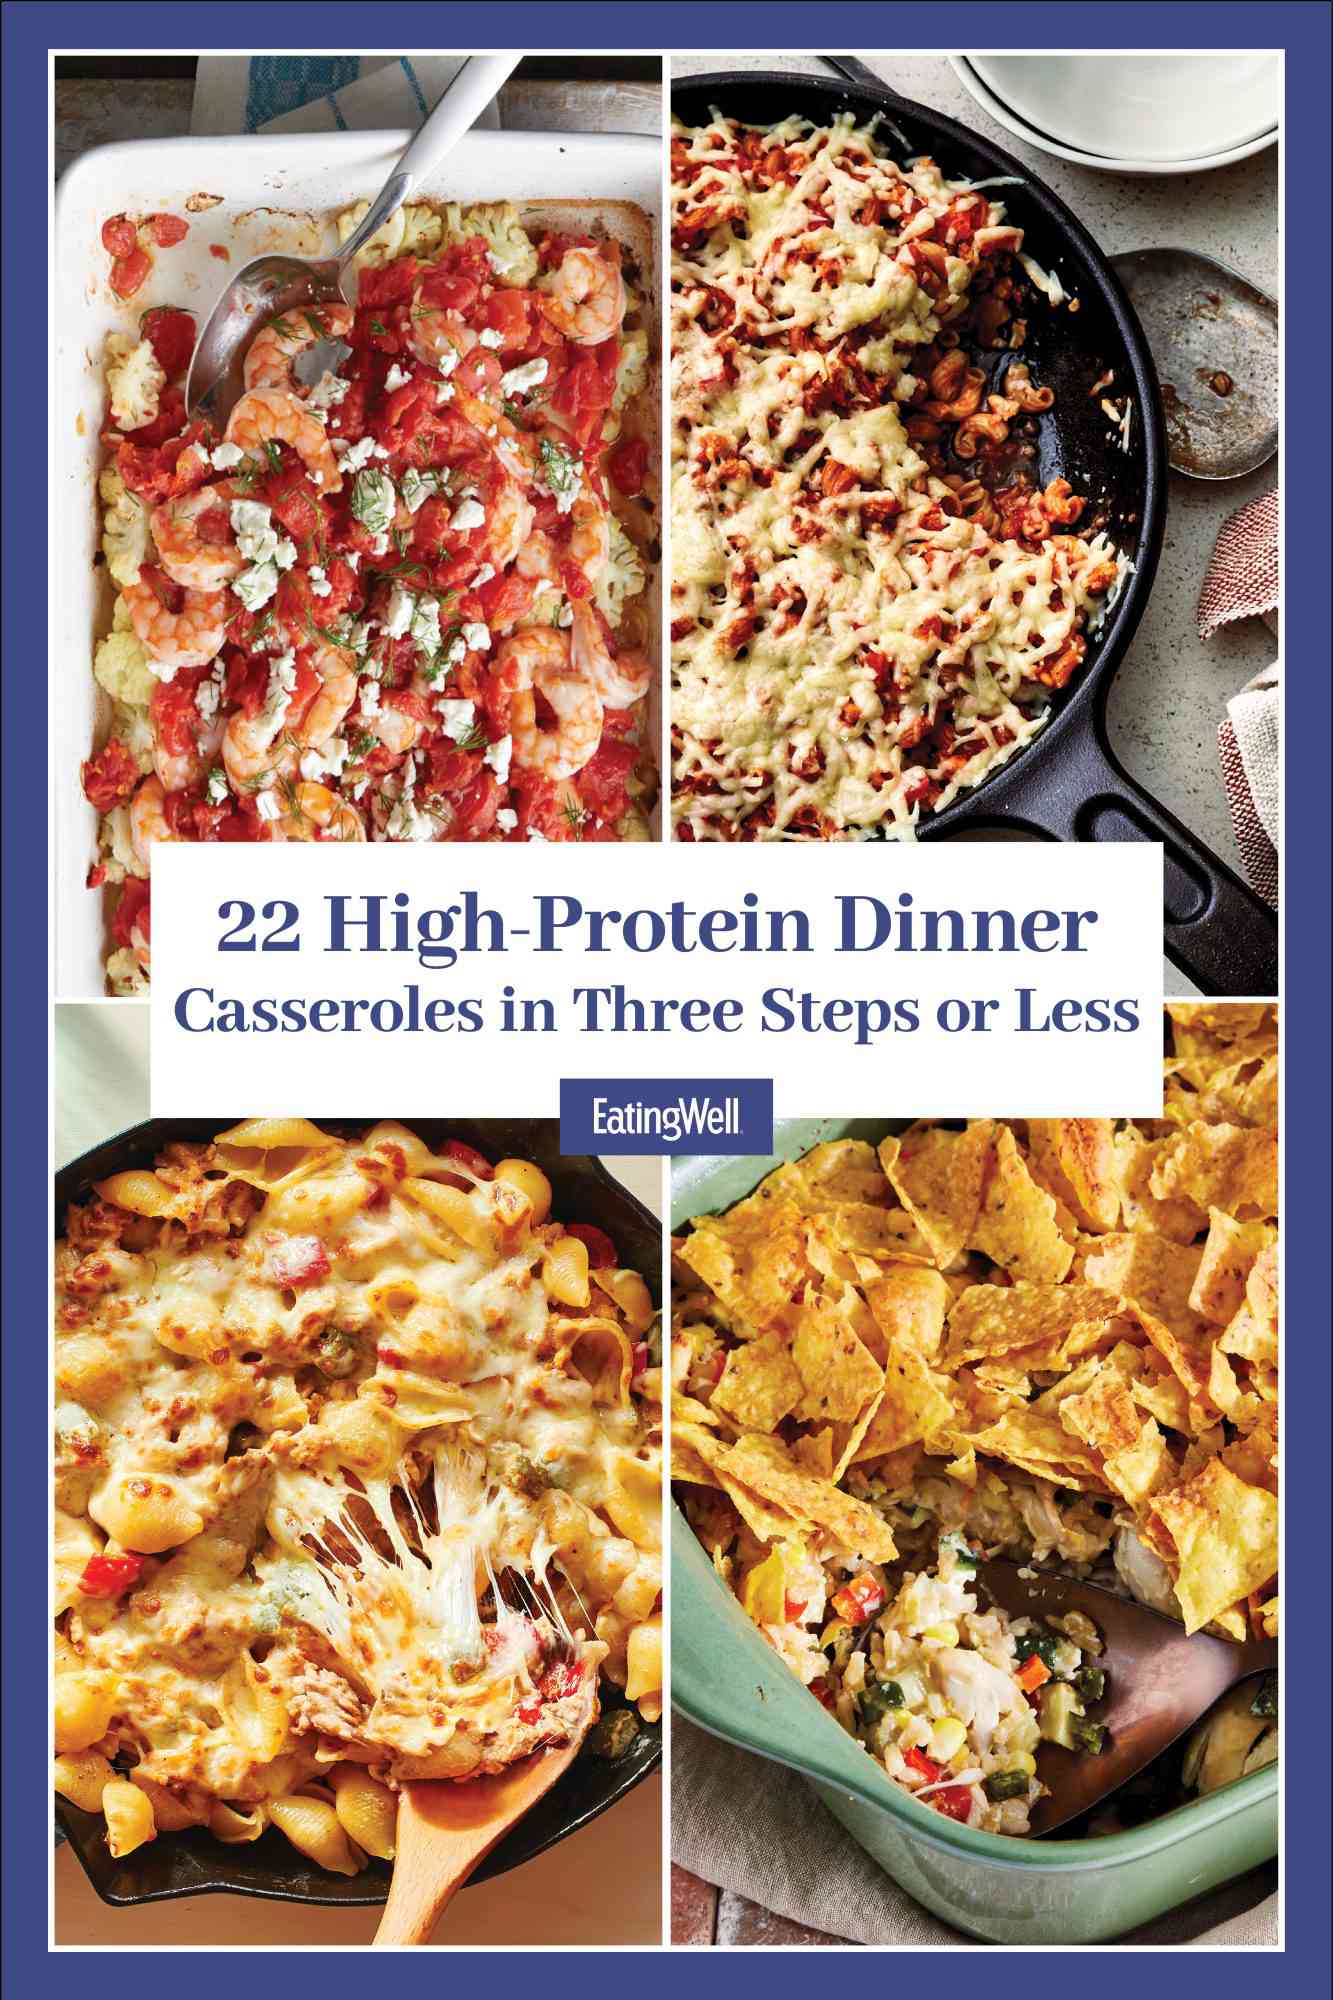 a collage featuring recipe photos from 22 High Protein Dinner Casseroles in 3 Steps or Less